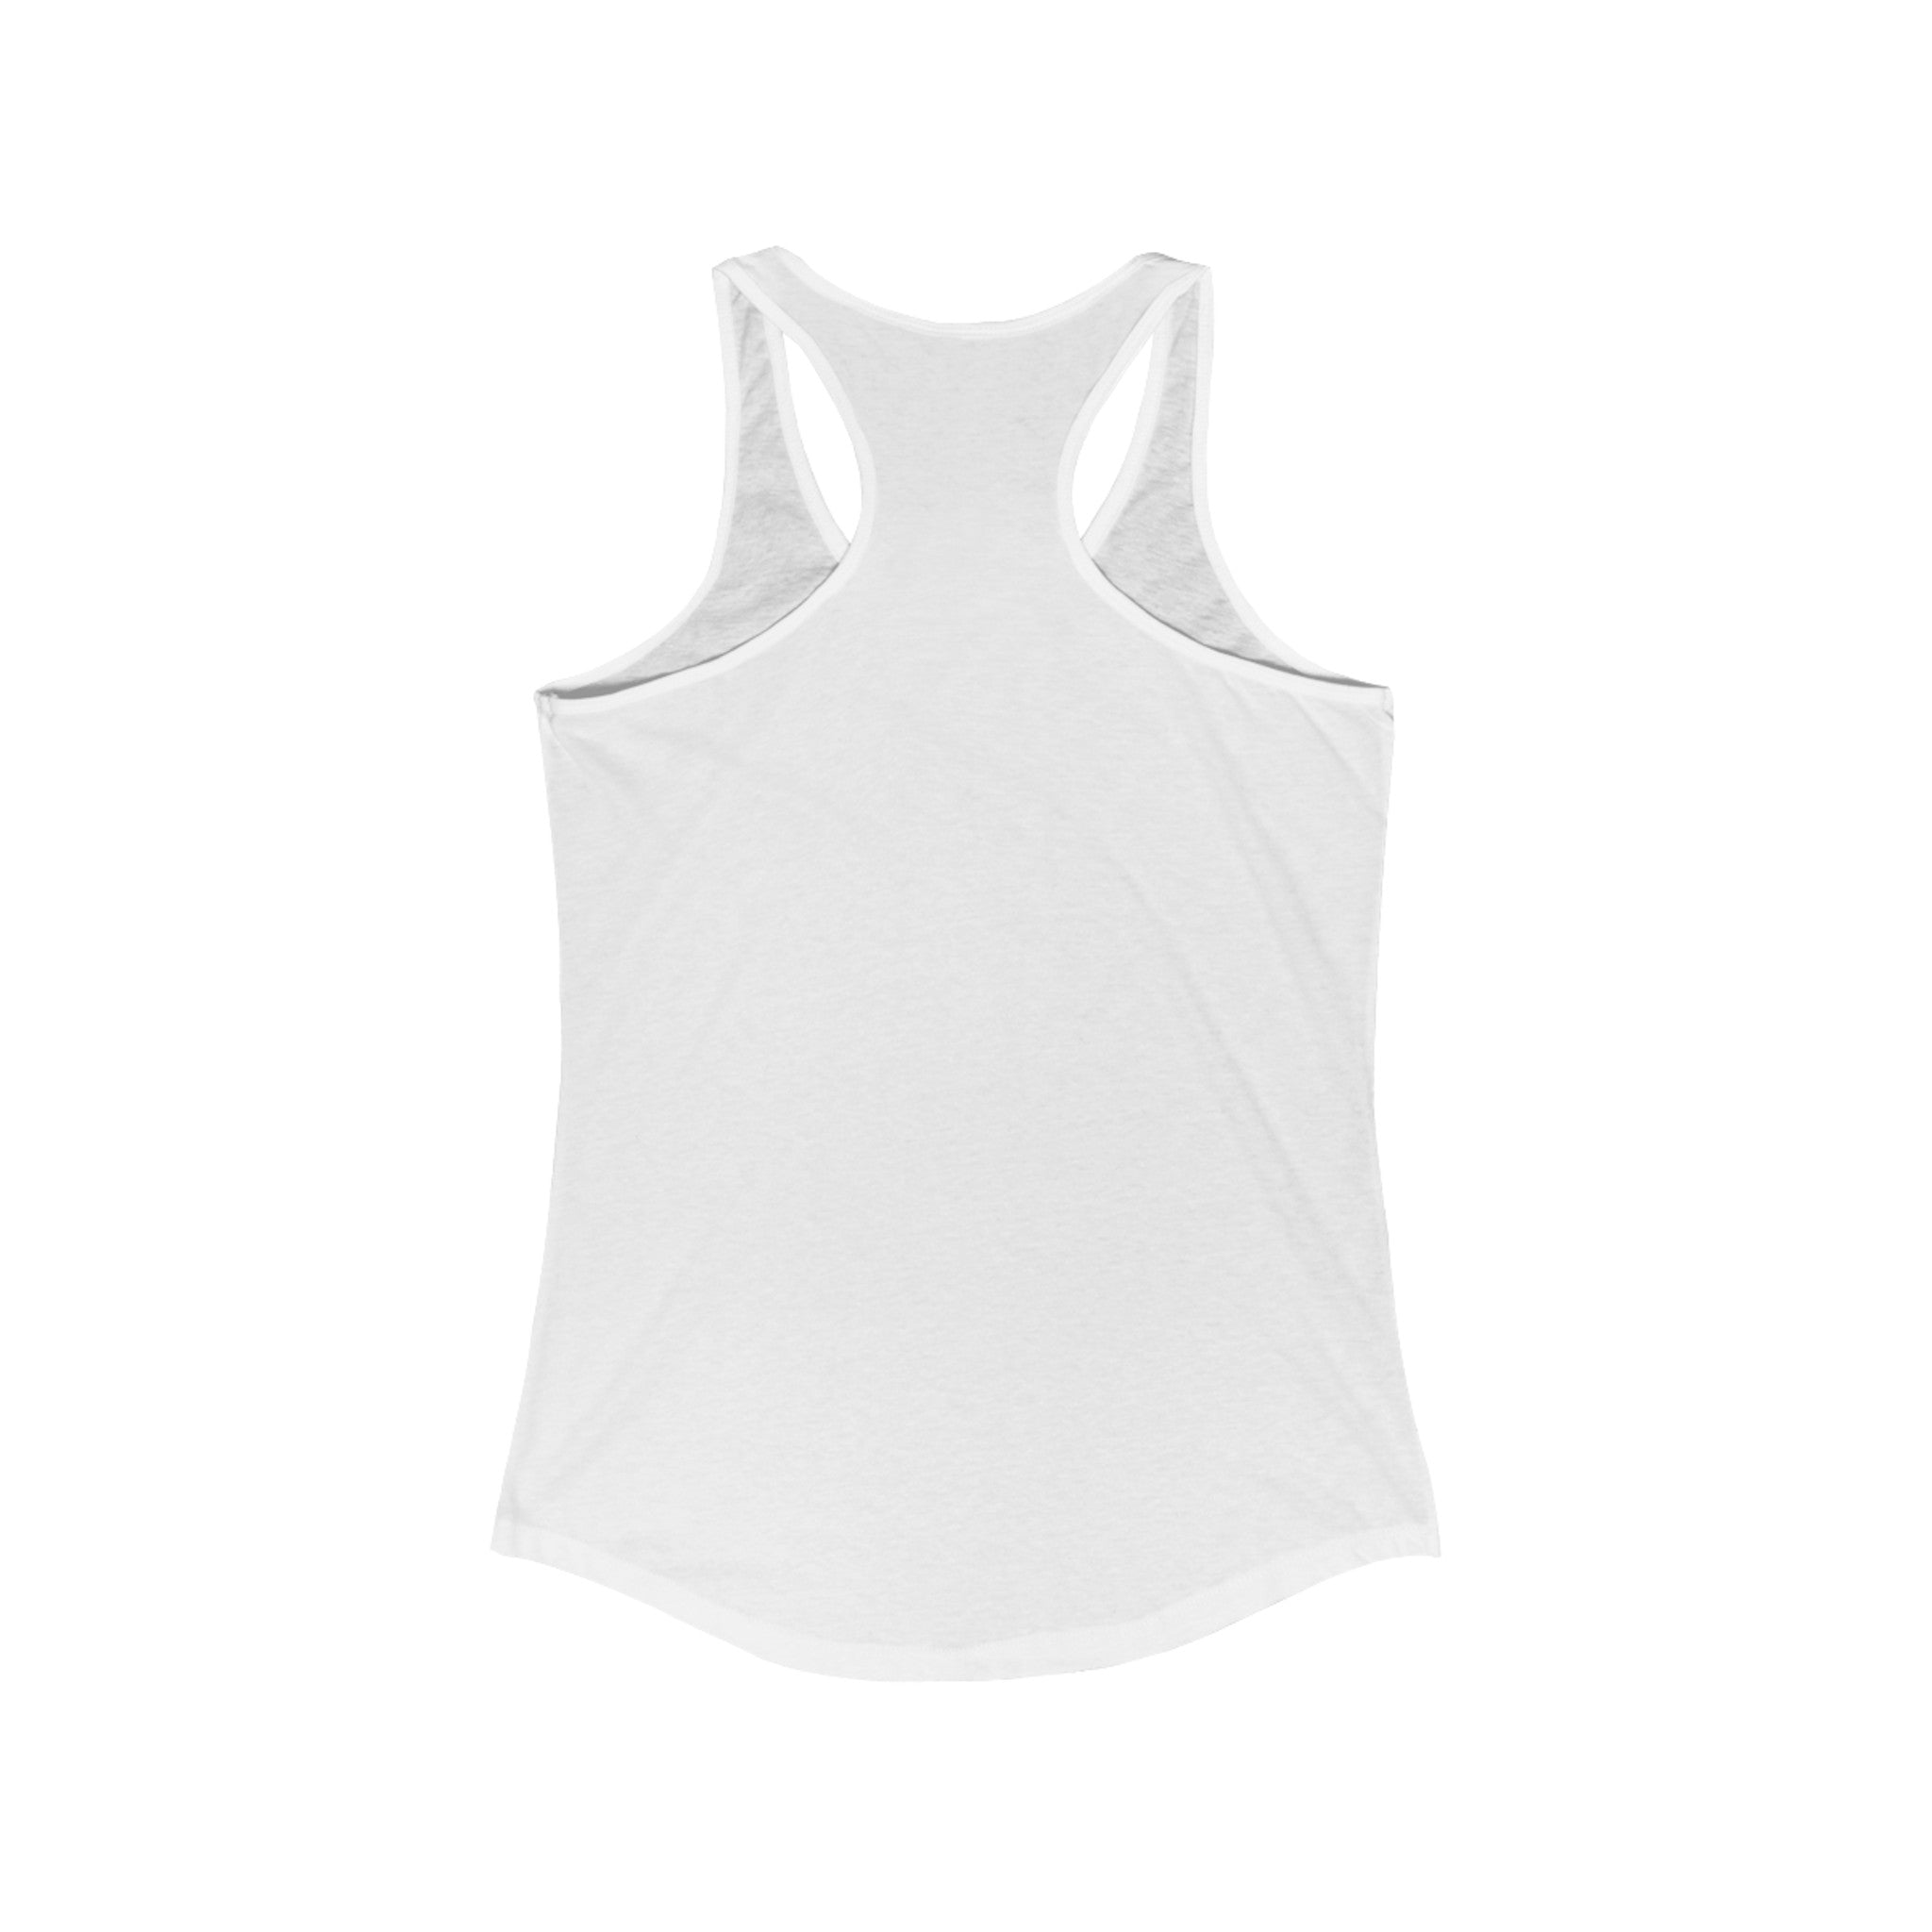 Back view of a Mocha - Women's Racerback Tank, perfect for active living, against a white background.